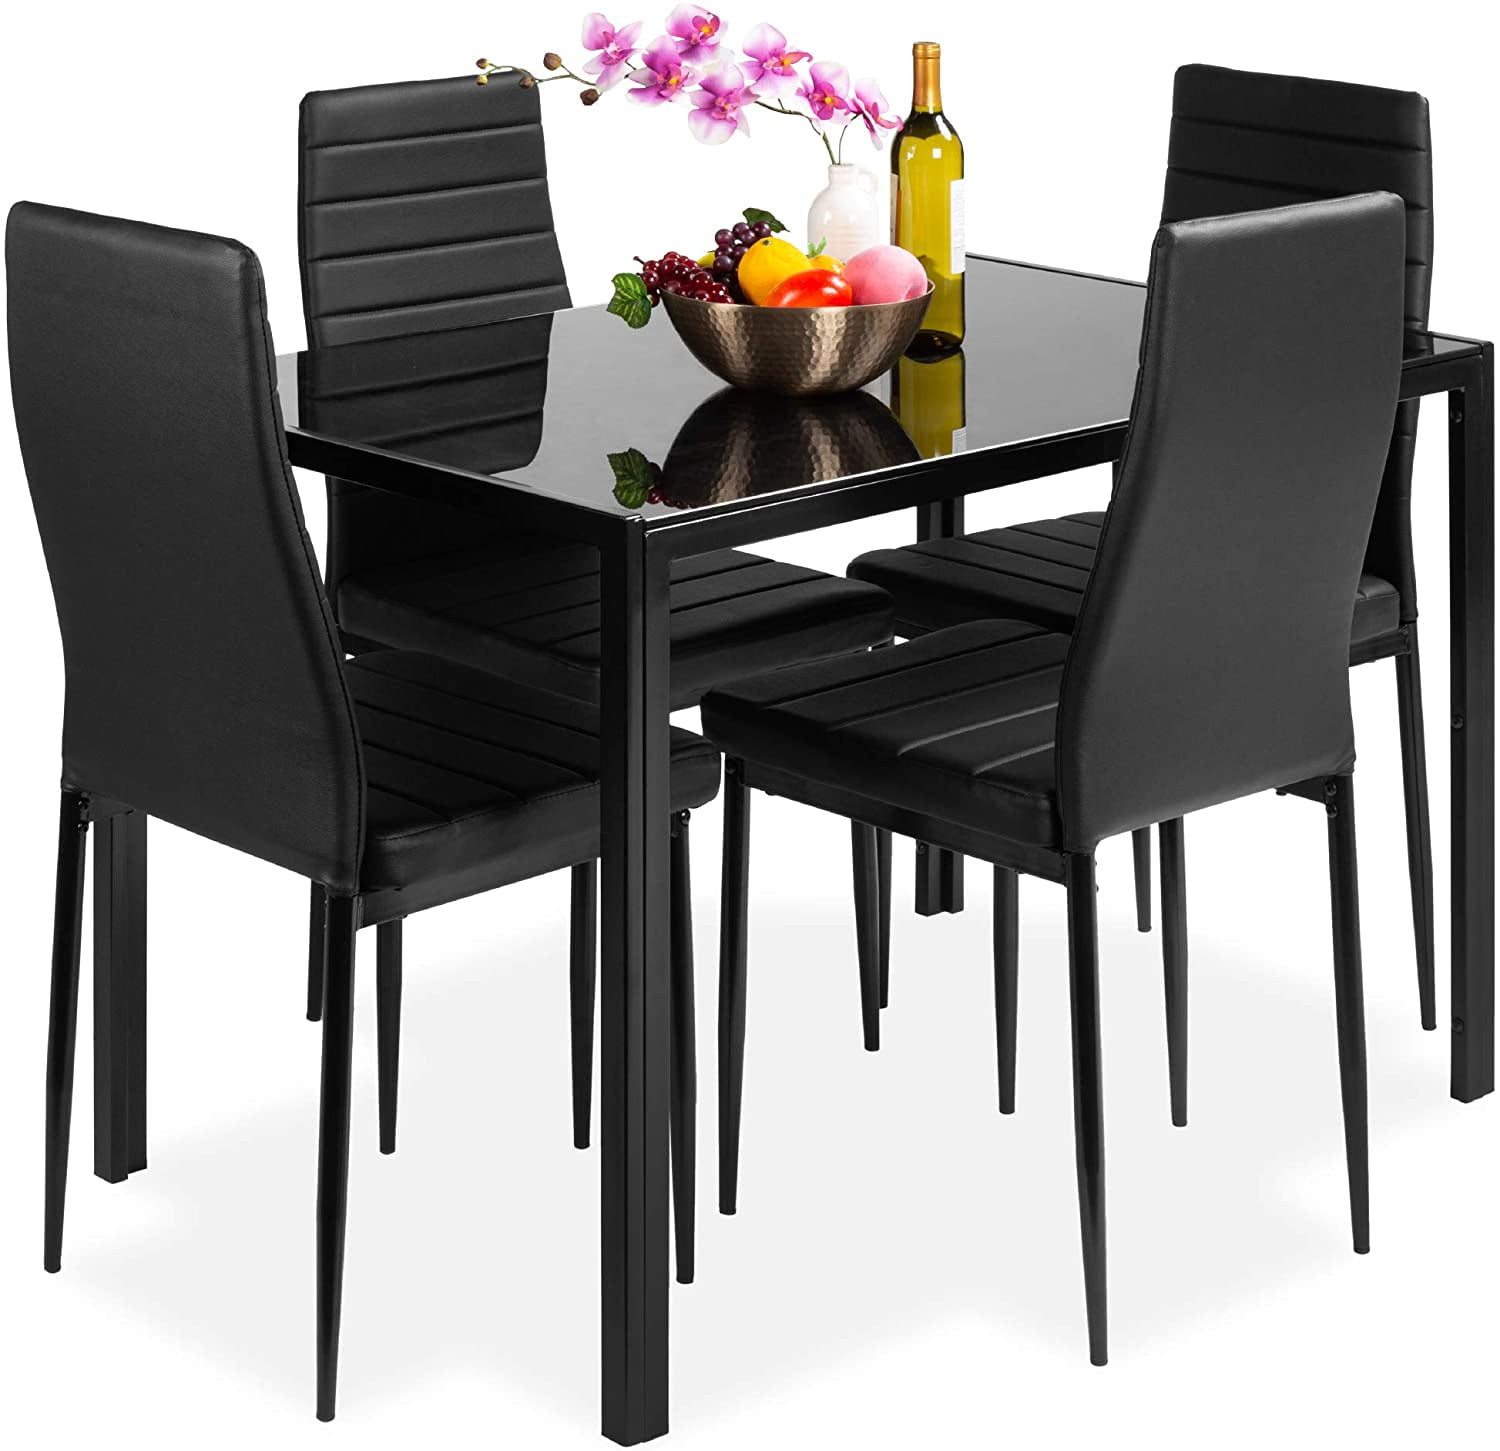 5 PCS Dining room Set Glass Dining Table 4 Swivel Chair with Metal Wood Leg for Dining Room Kitchen Furniture Black 